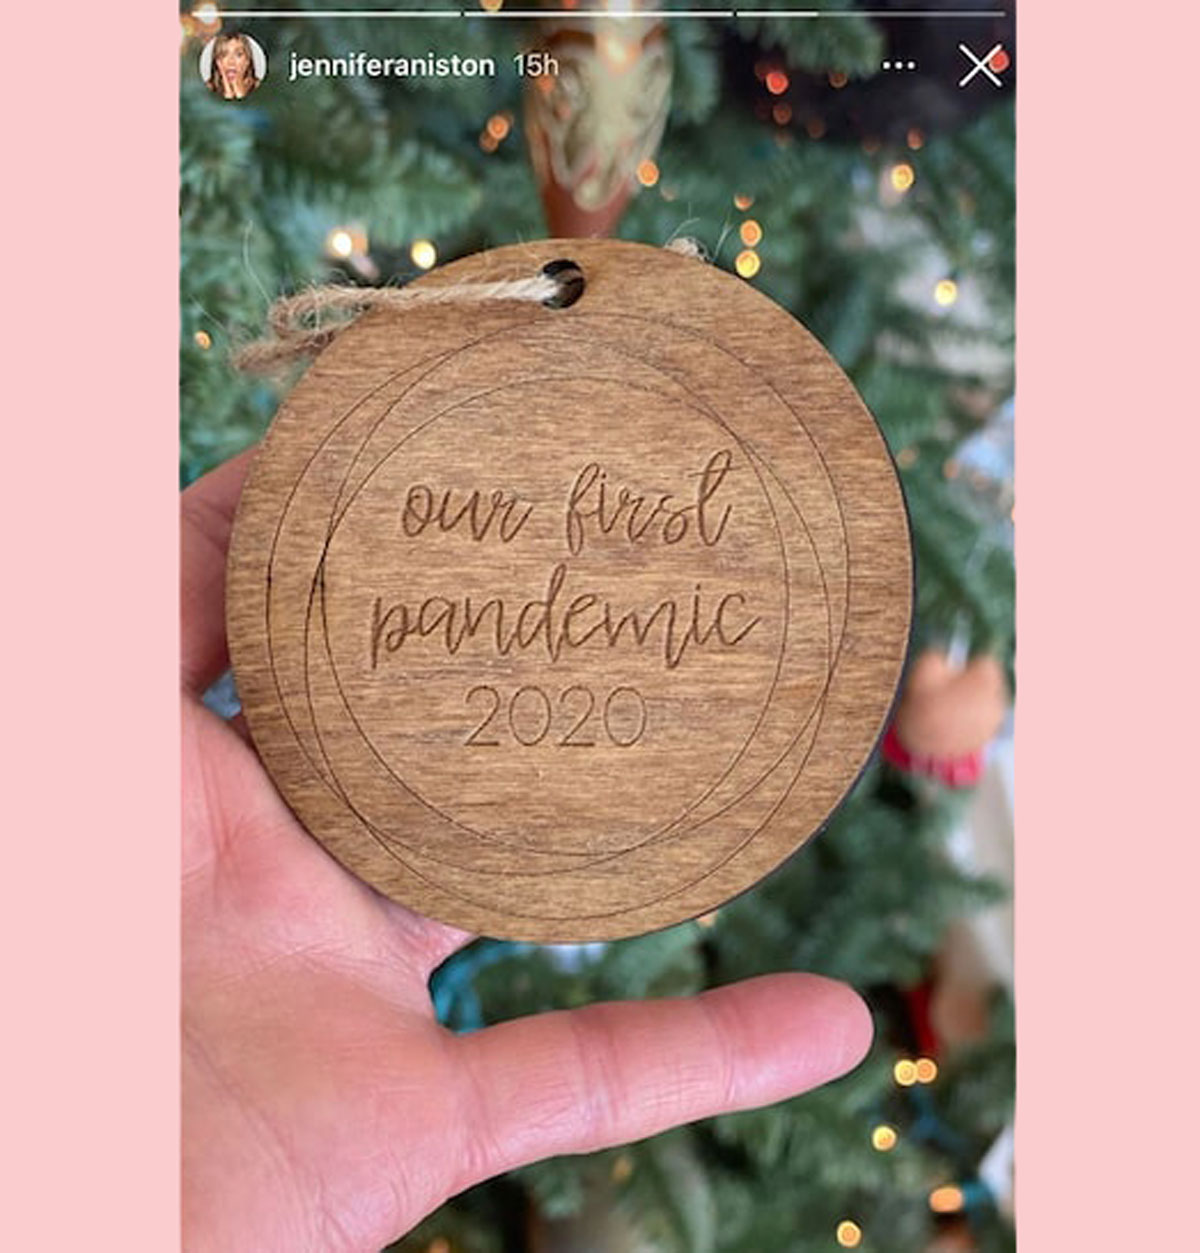 Are you offended by Jennifer Aniston's "our first pandemic" Christmas ornament?